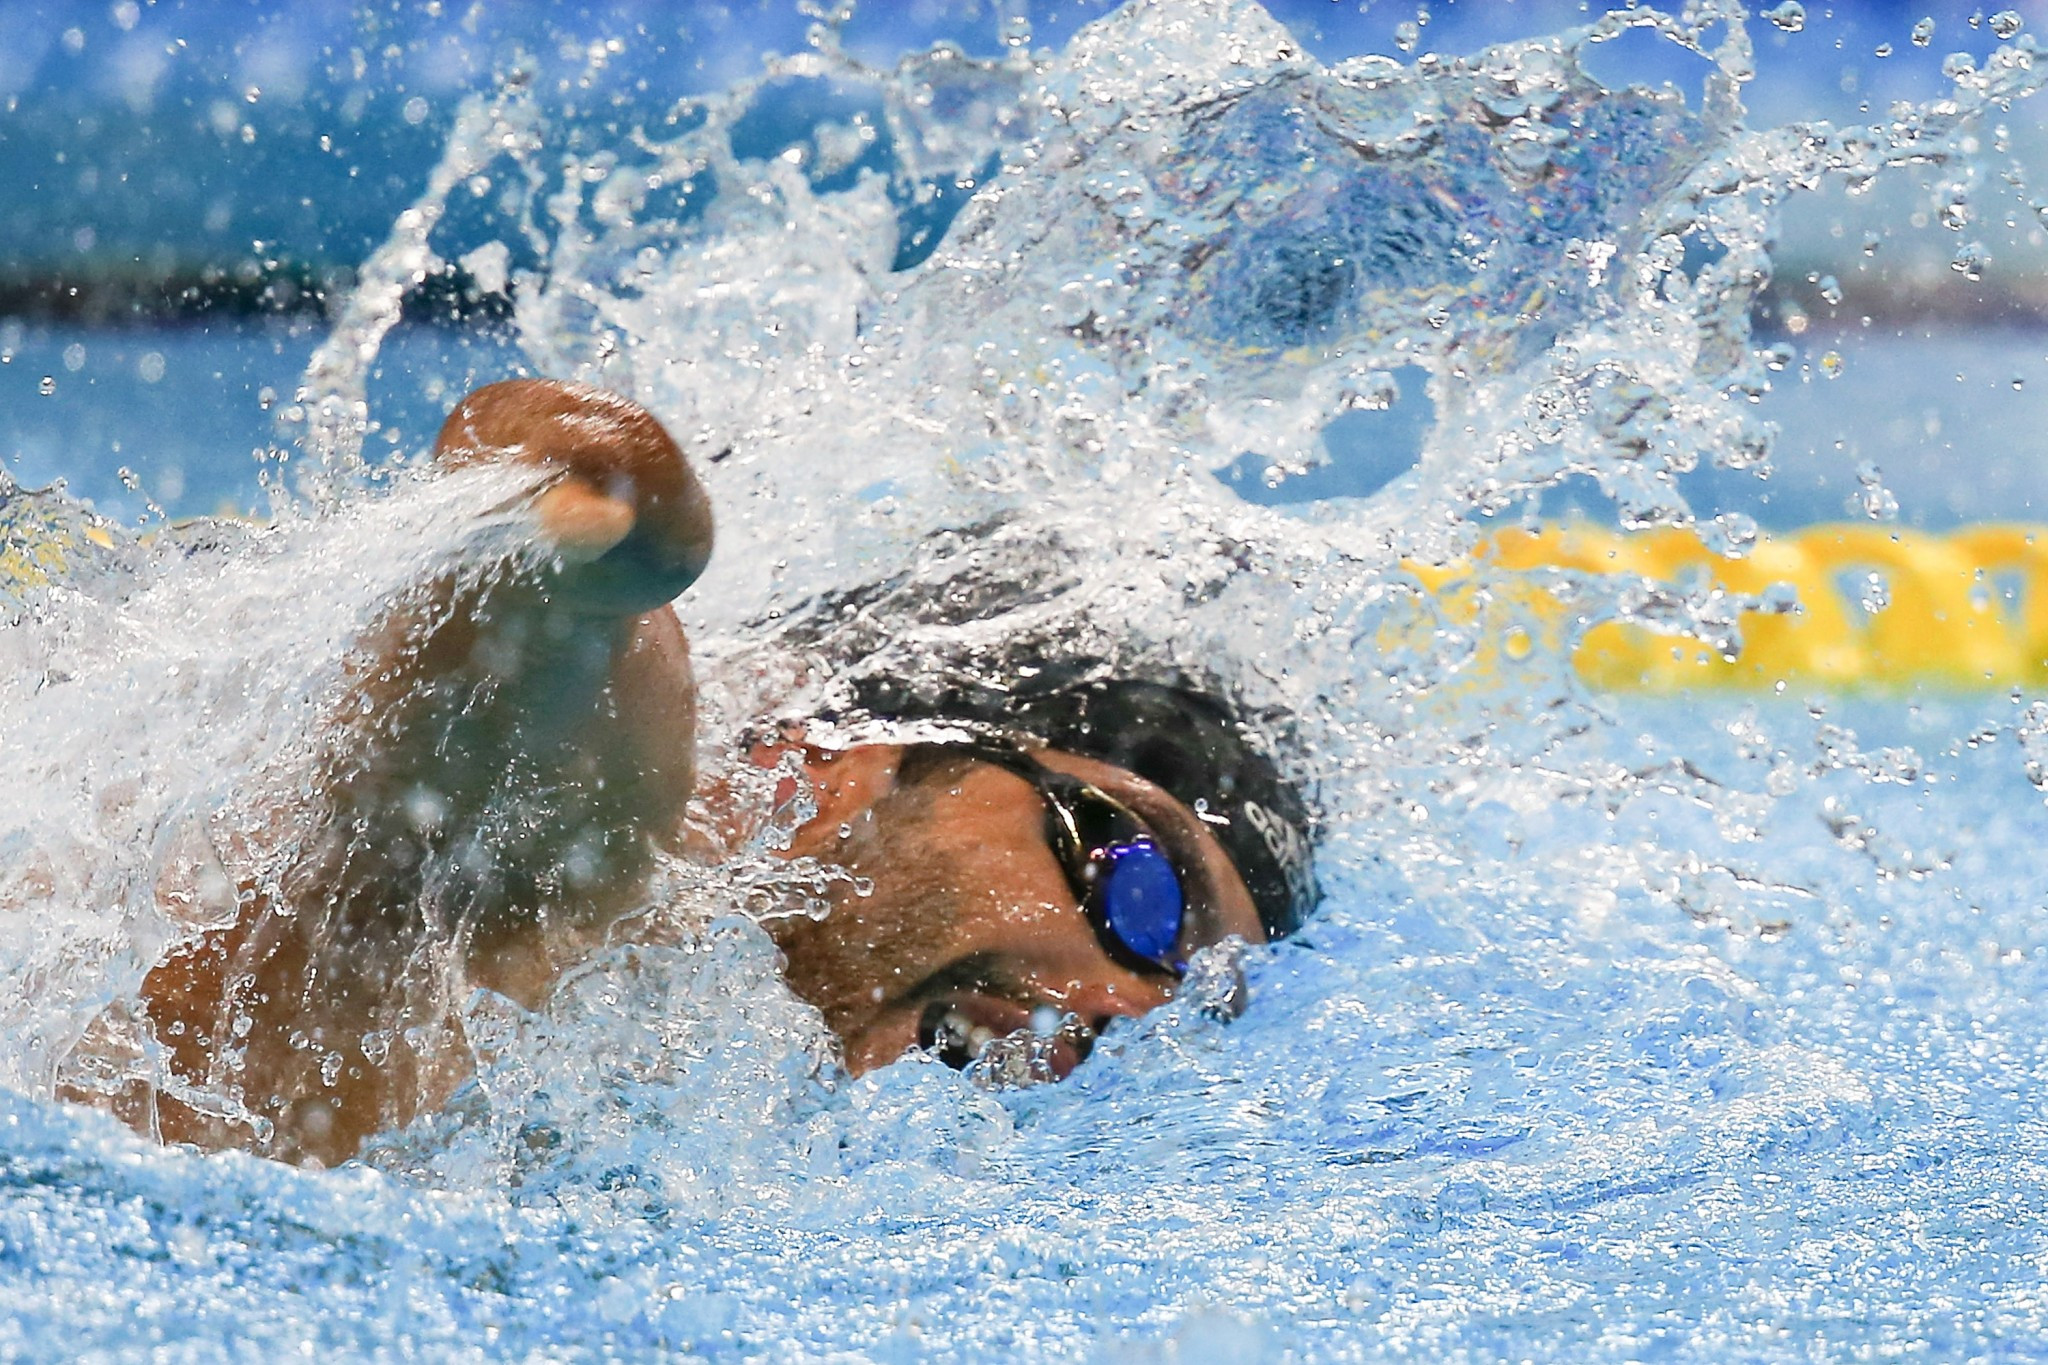 Swimming will have 146 medal events at Tokyo 2020, six less than the number for Rio 2016 ©Getty Images